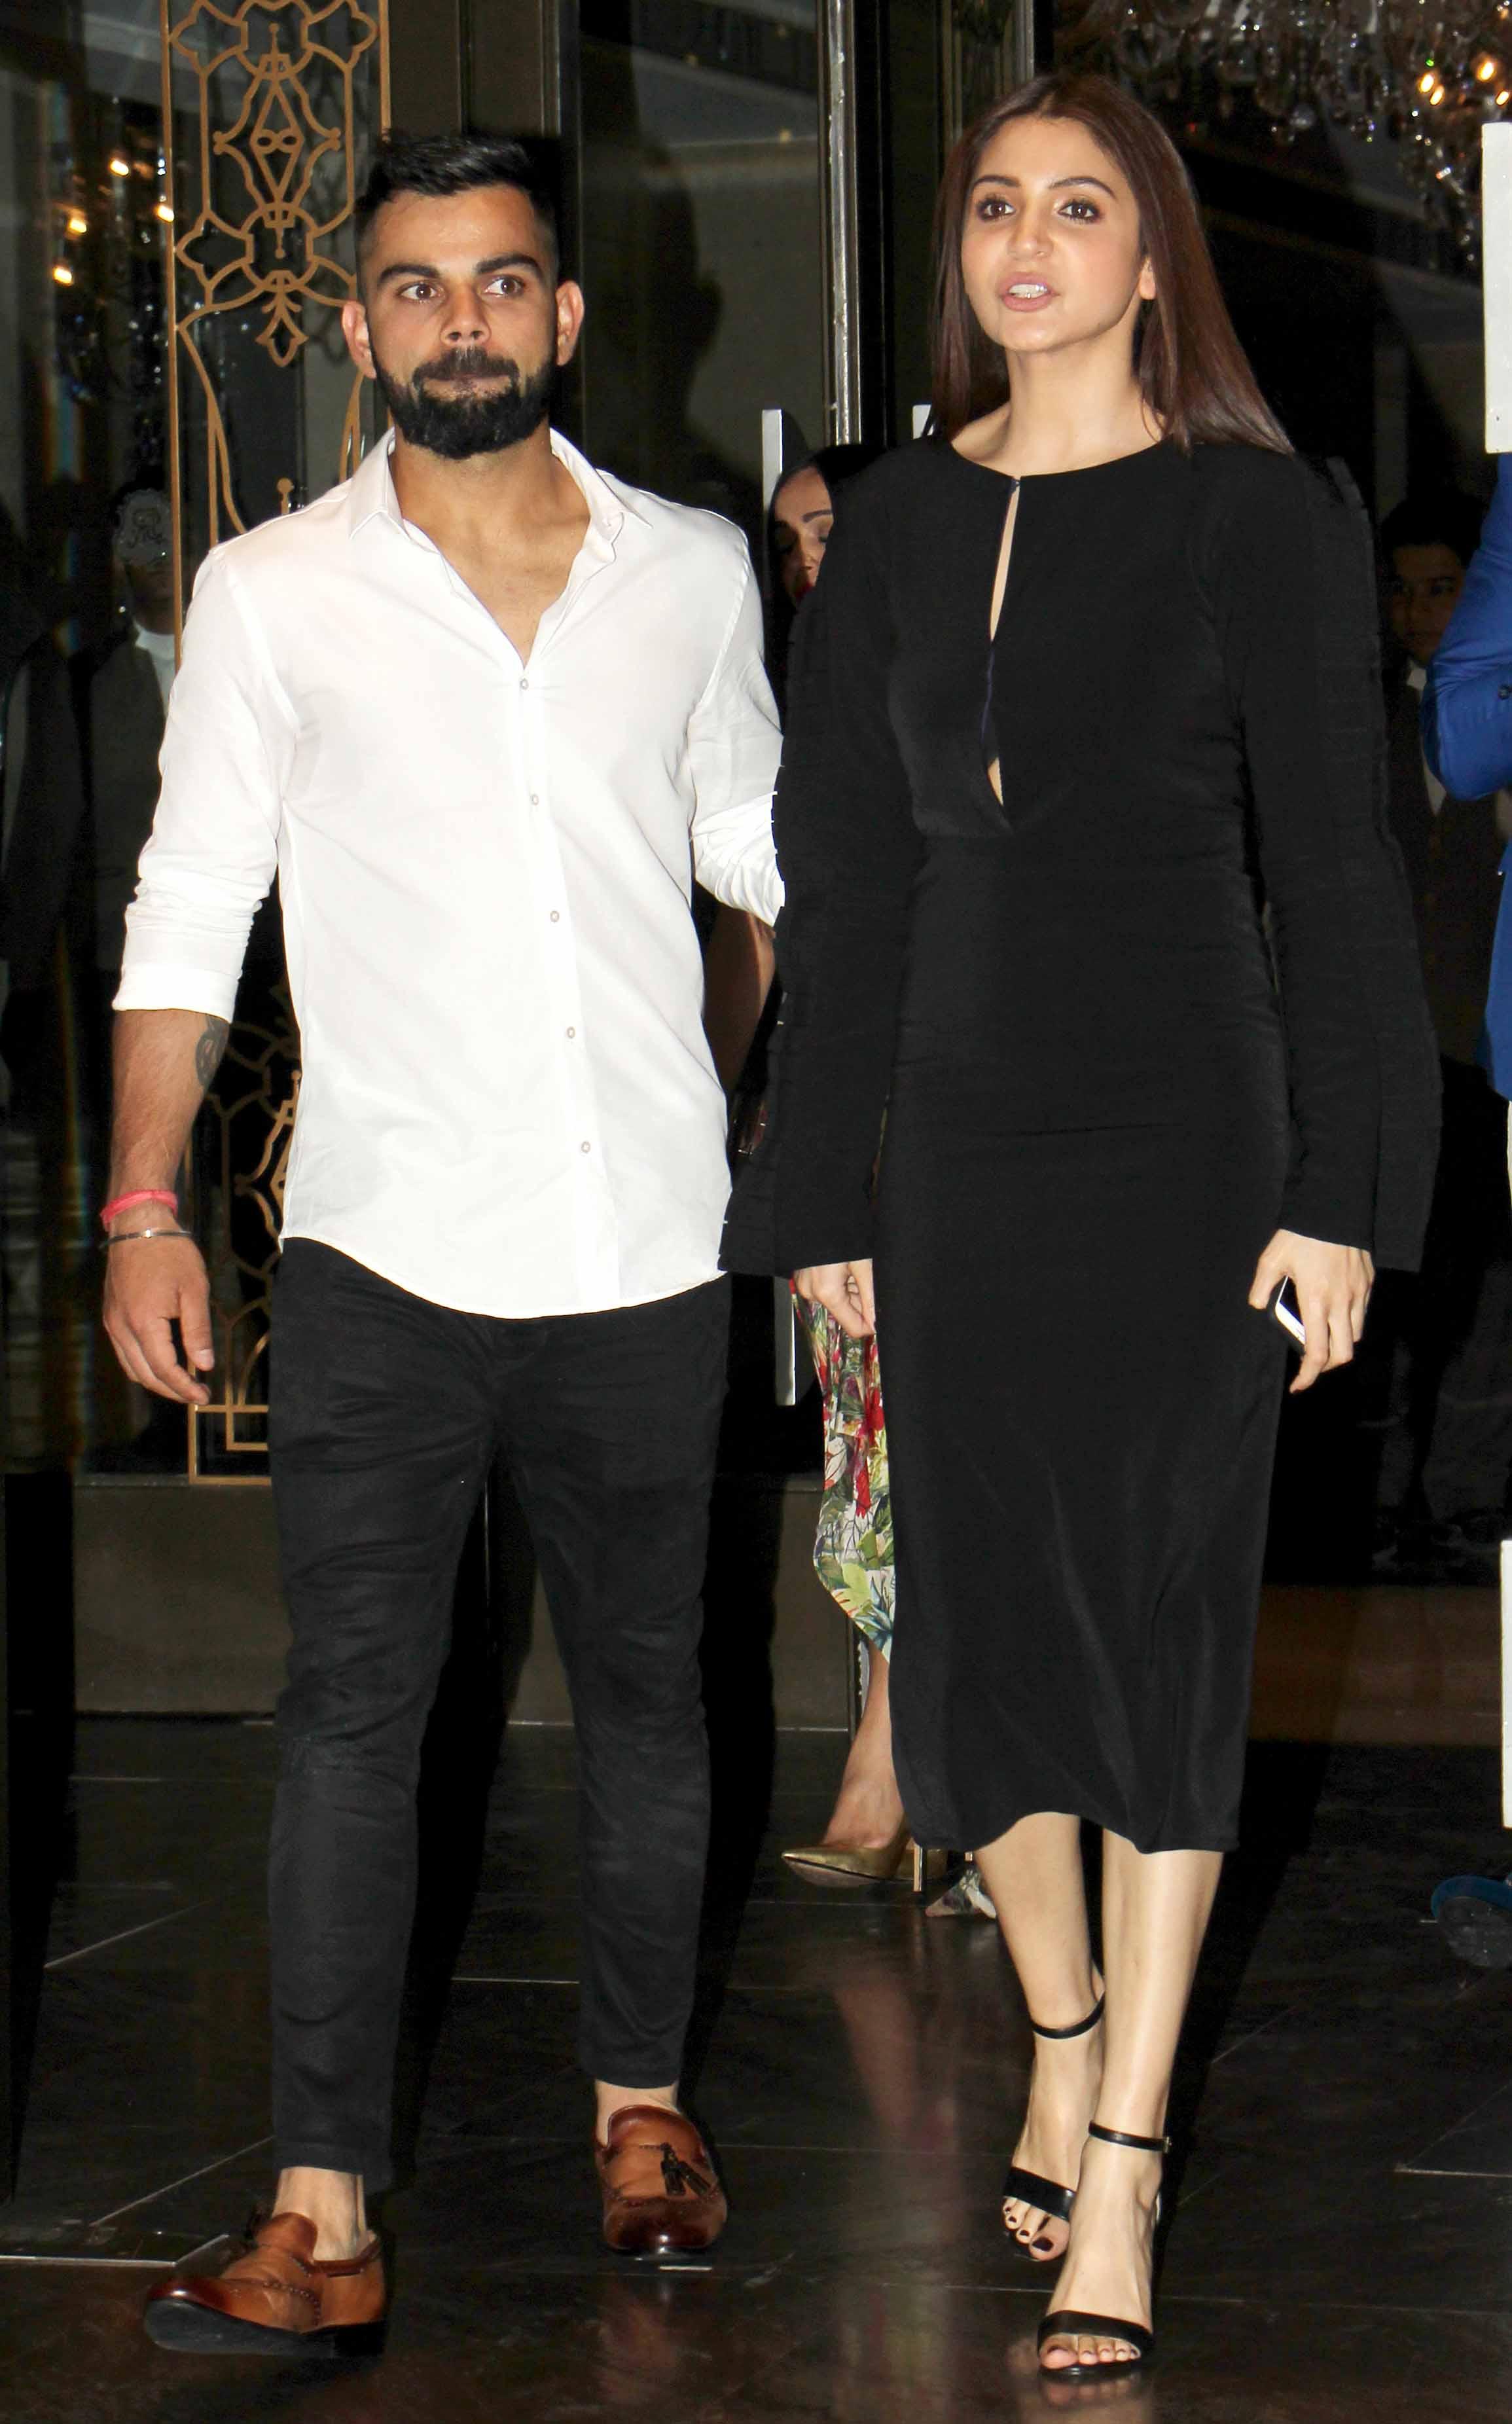 May 2017: Virat Kohli and Anushka Sharma attended former Indian pacer Zaheer Khan and Bollywood actress Sagarika Ghatge's engagement together. They looked colour co-ordinated in black and white